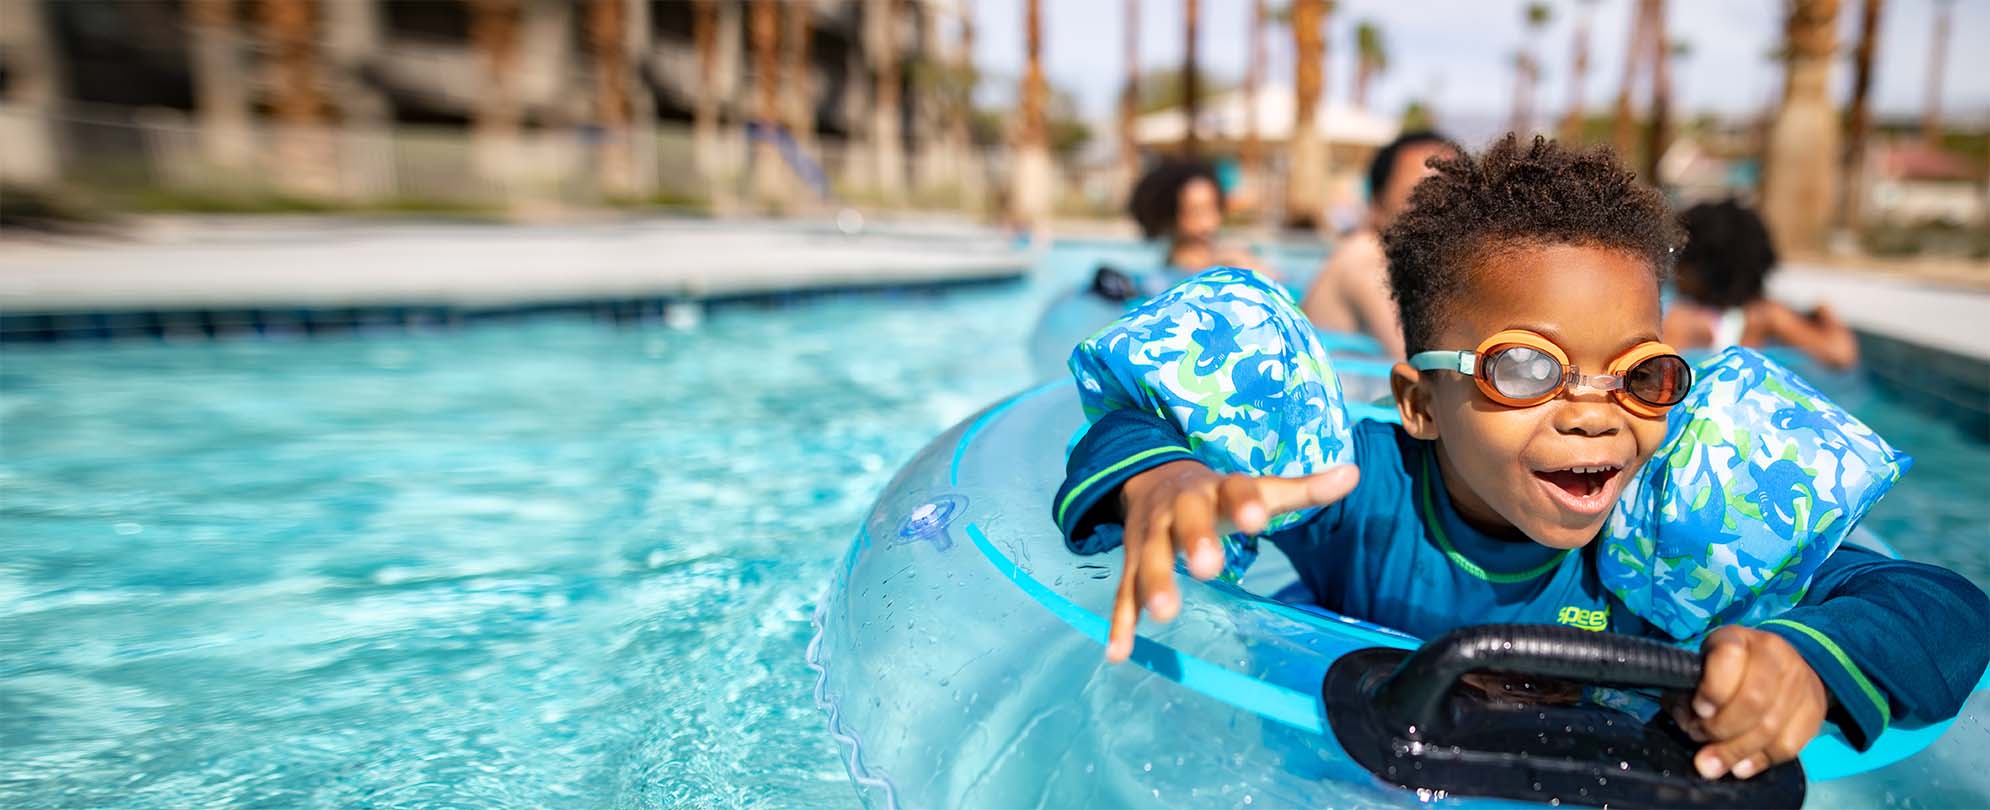 A smiling, young boy wearing swim goggles rides on a tube float at a WorldMark by Wyndham resort pool.